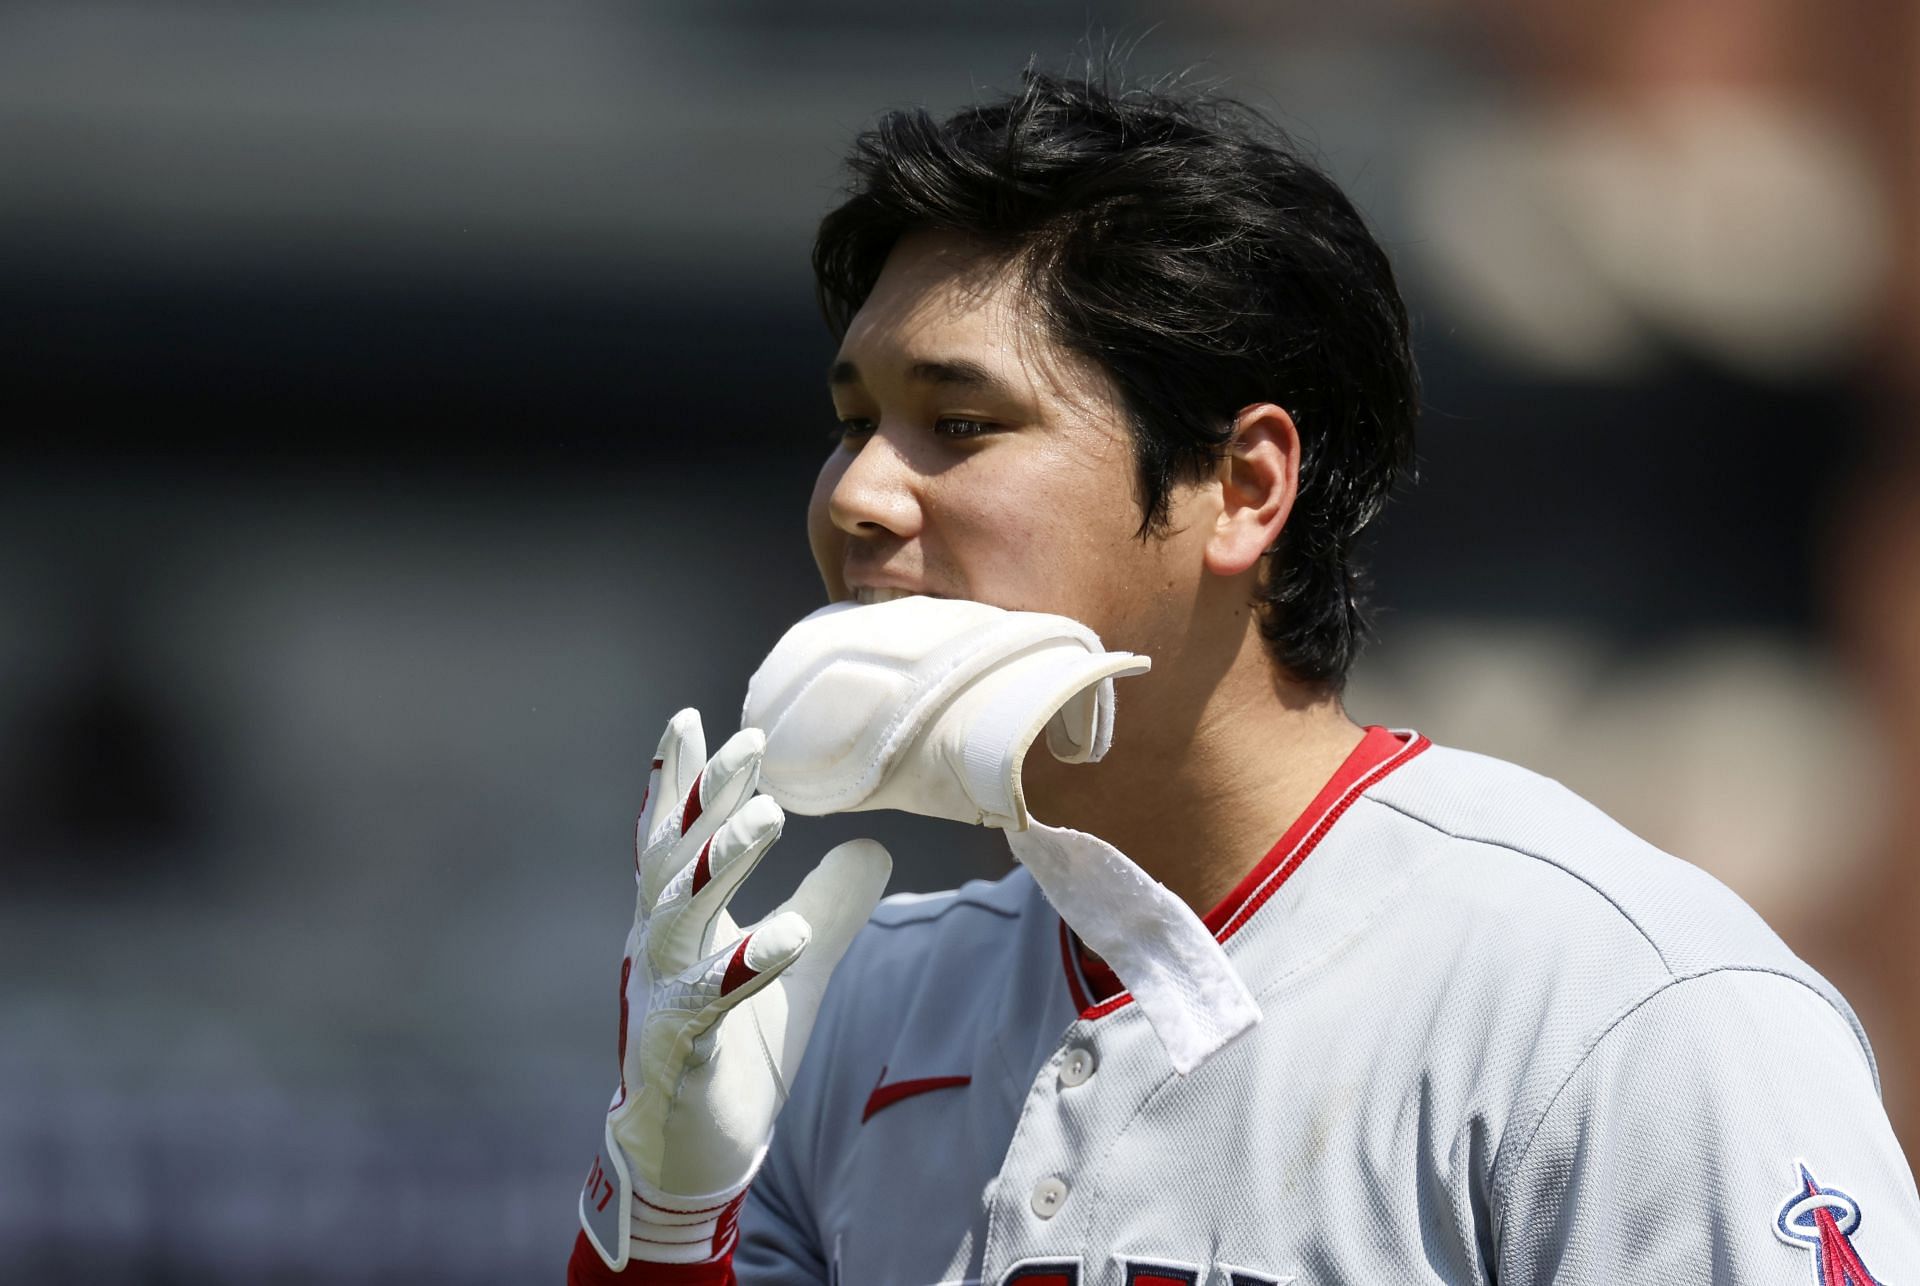 Shohei Ohtani of the Los Angeles Angels holds his protecting gear in his mouth at Comerica Park